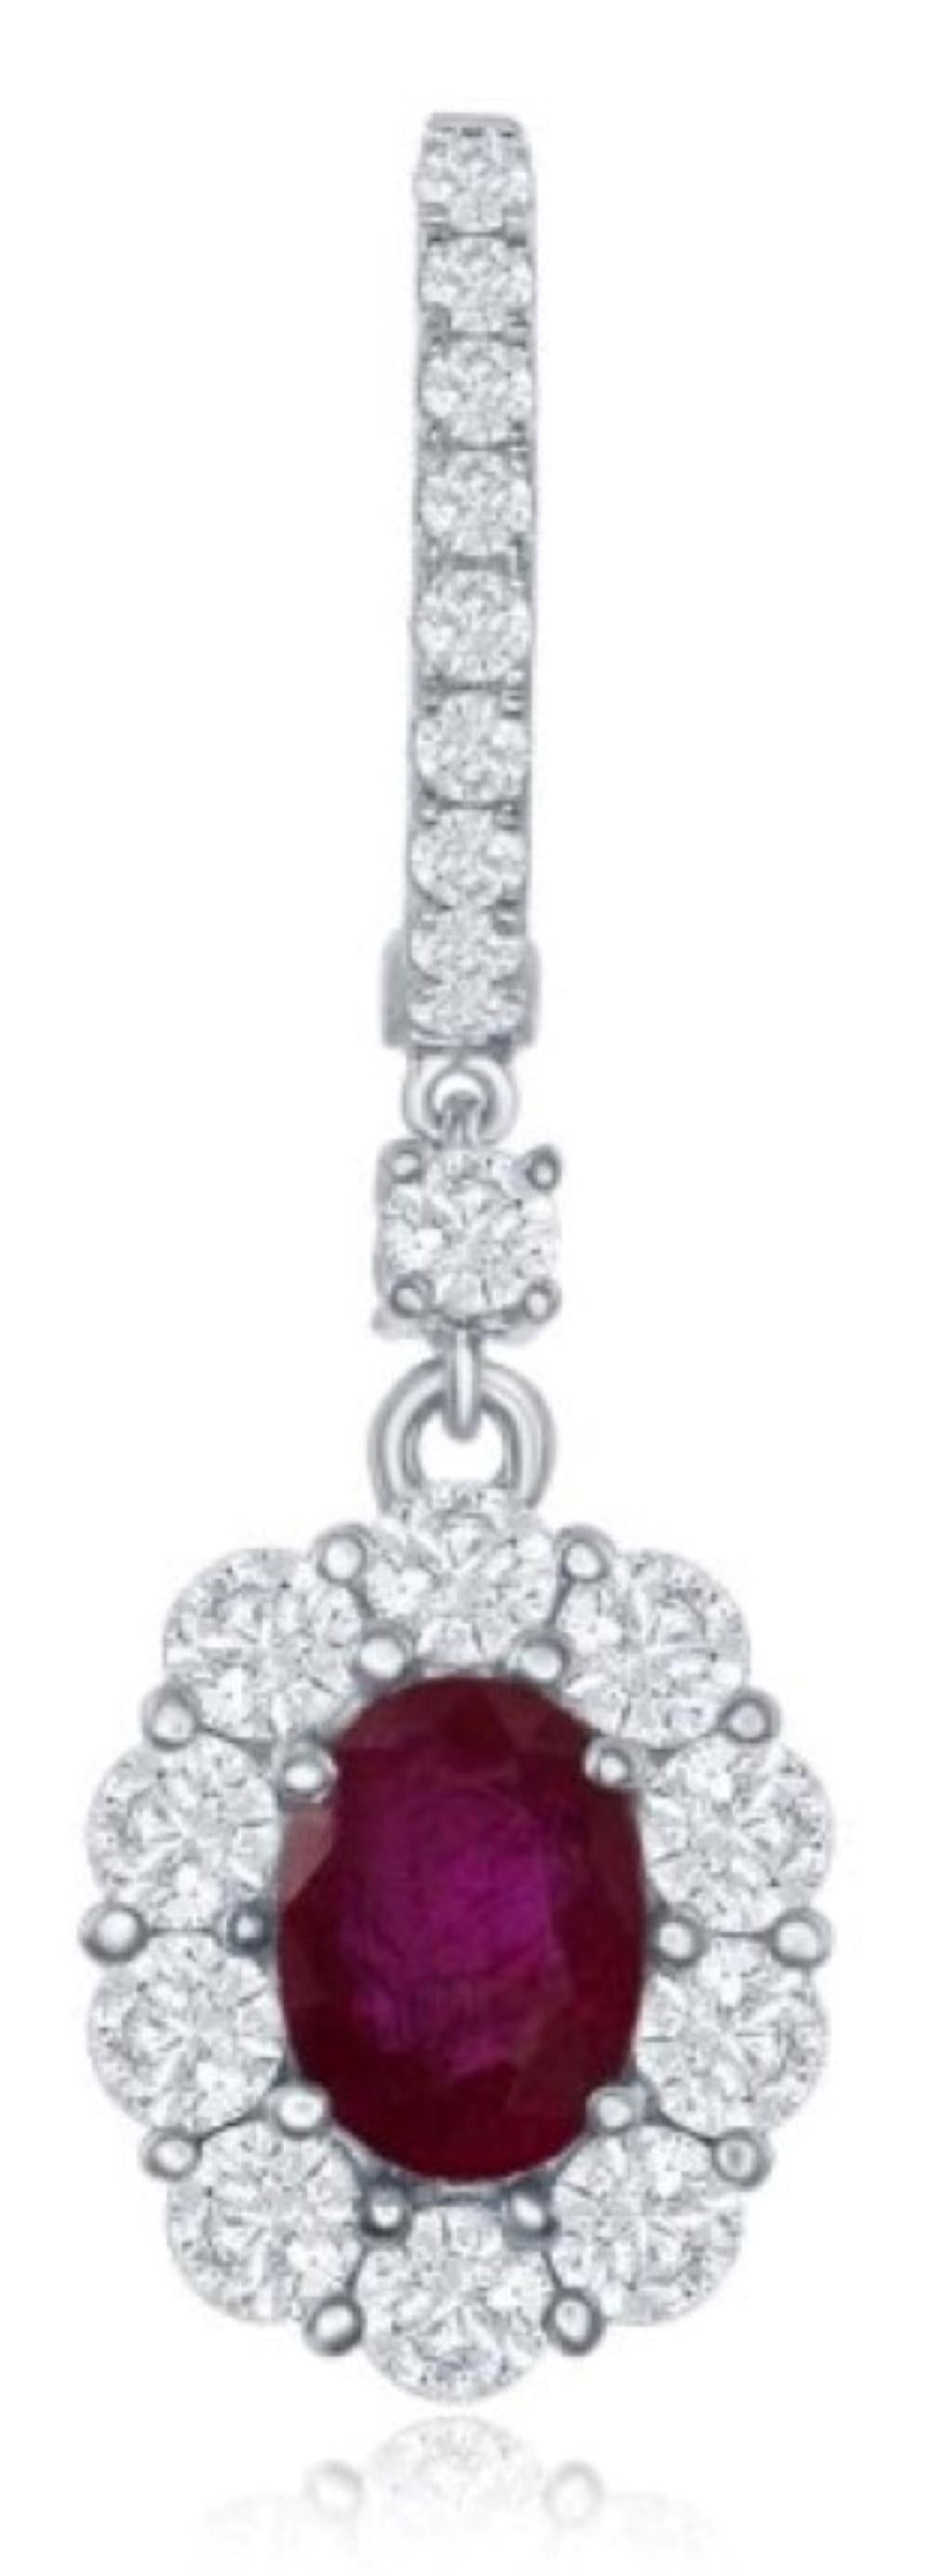 Beautiful drop style earrings articulate gently in the with light movement to throw brilliance and beauty in all directions. The two oval brilliant rubies total 1.99ct and there are 1.88 ct of accenting round brilliant cut diamonds. These are